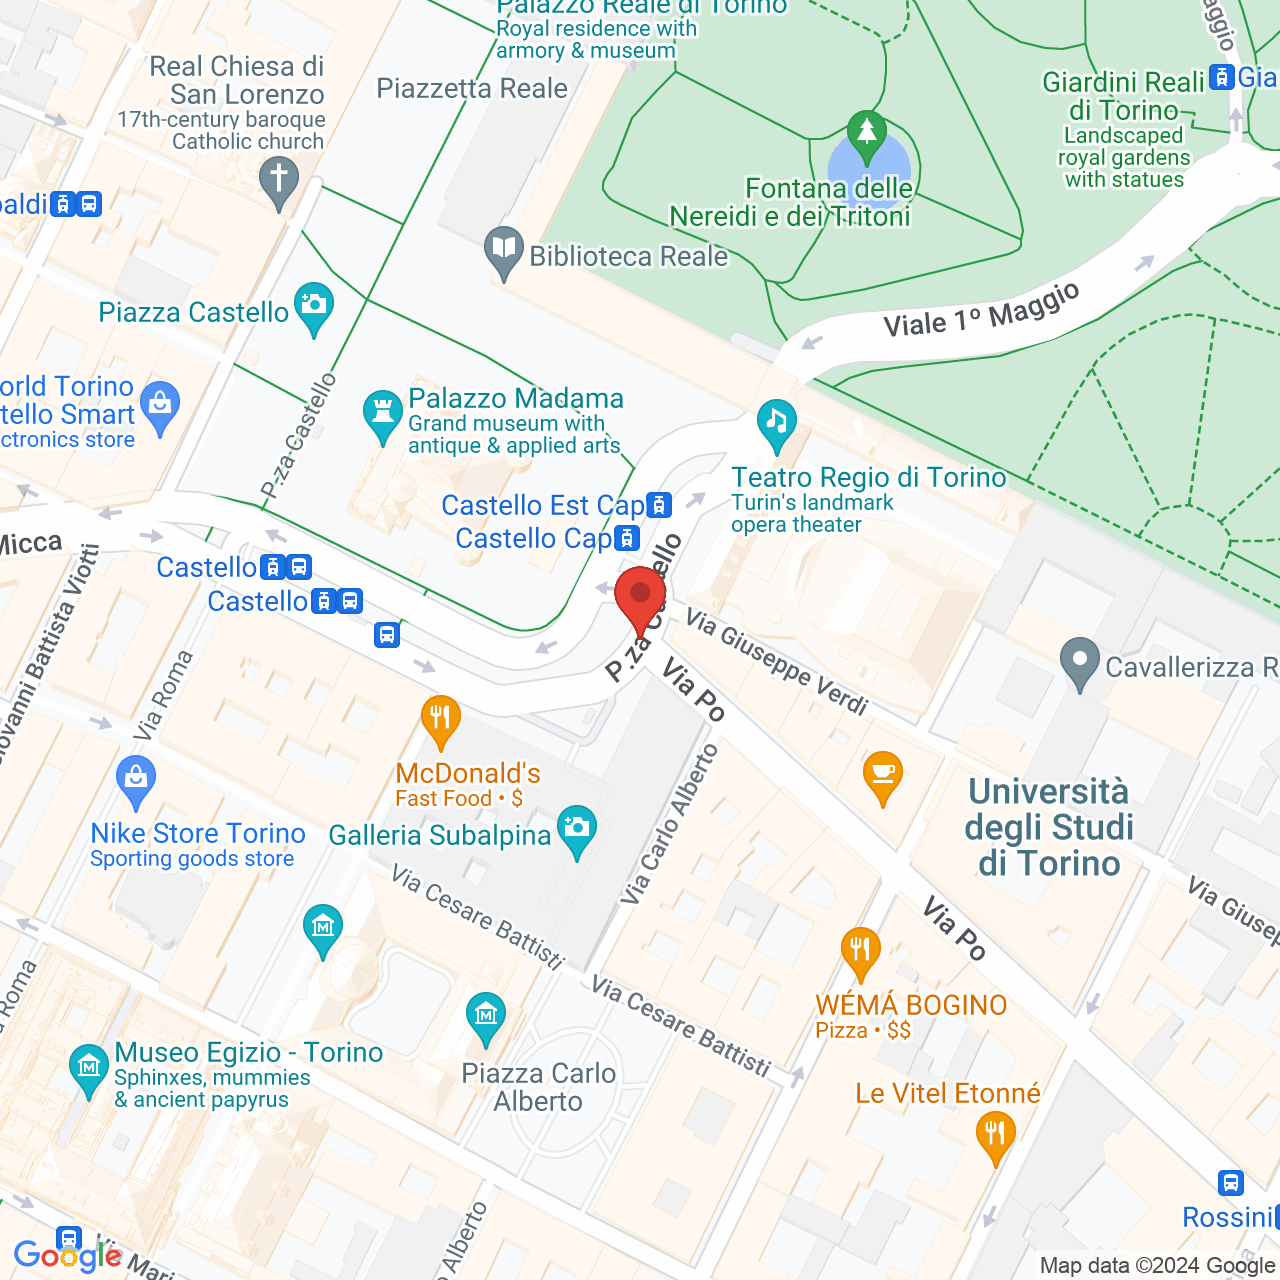 https://maps.googleapis.com/maps/api/staticmap?zoom=10&maptype=hybrid&scale=4&center=45.0703393,7.686864&markers=color:red%7C%7C45.0703393,7.686864&size=1000x1000&key=AIzaSyAQg6Liu52-a7wn17F9B-5c4QmJ9kTO3Mo